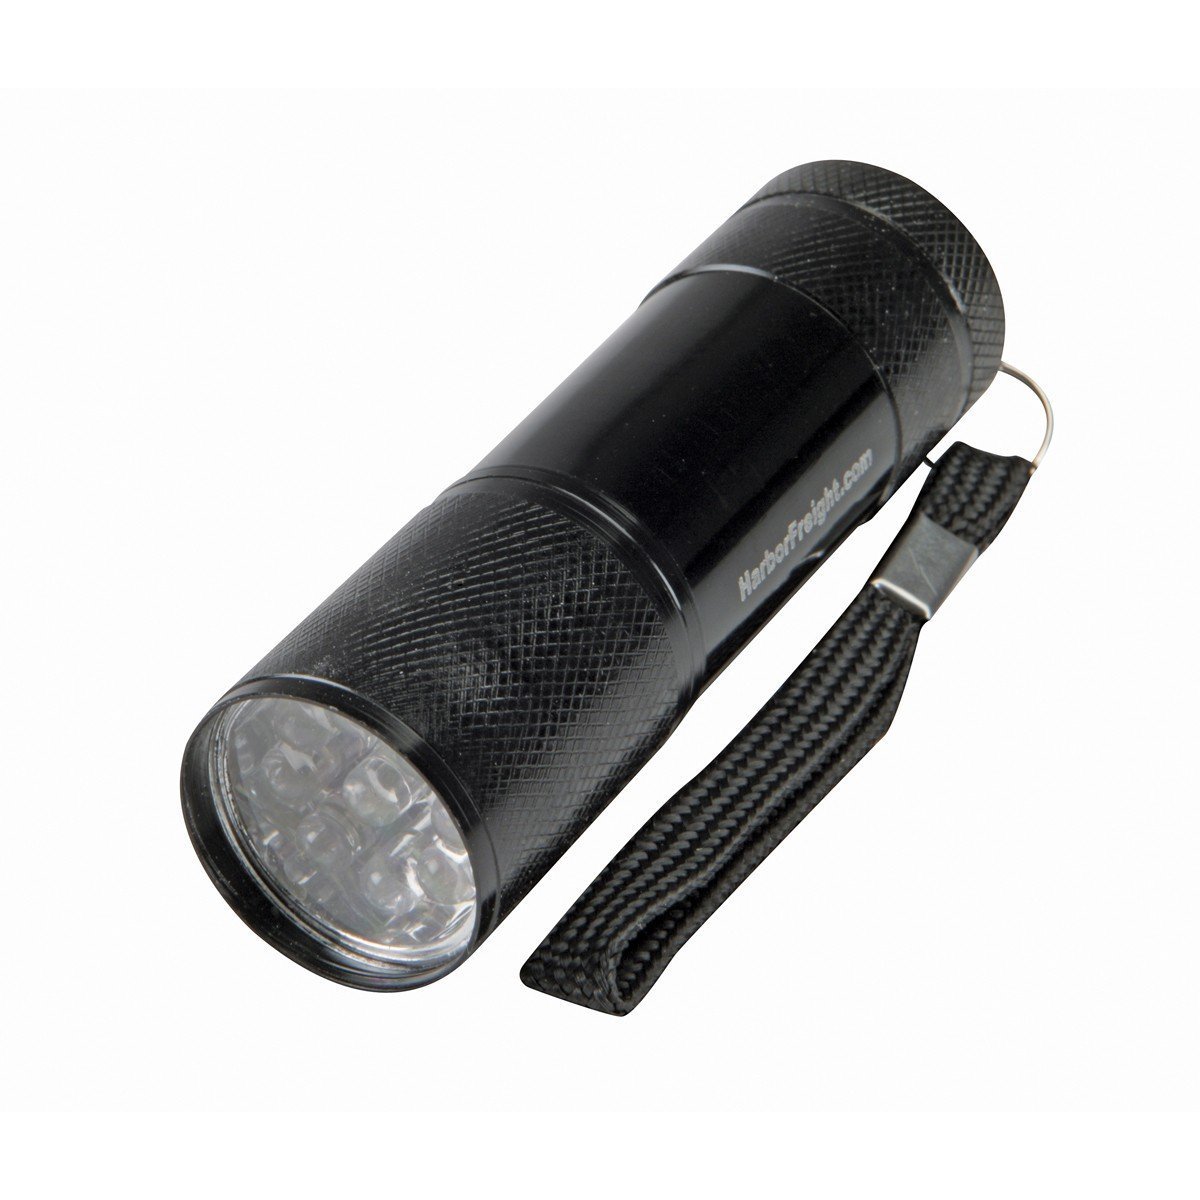 -3mf 3-in-1 Flashlight With 4aa Batteries